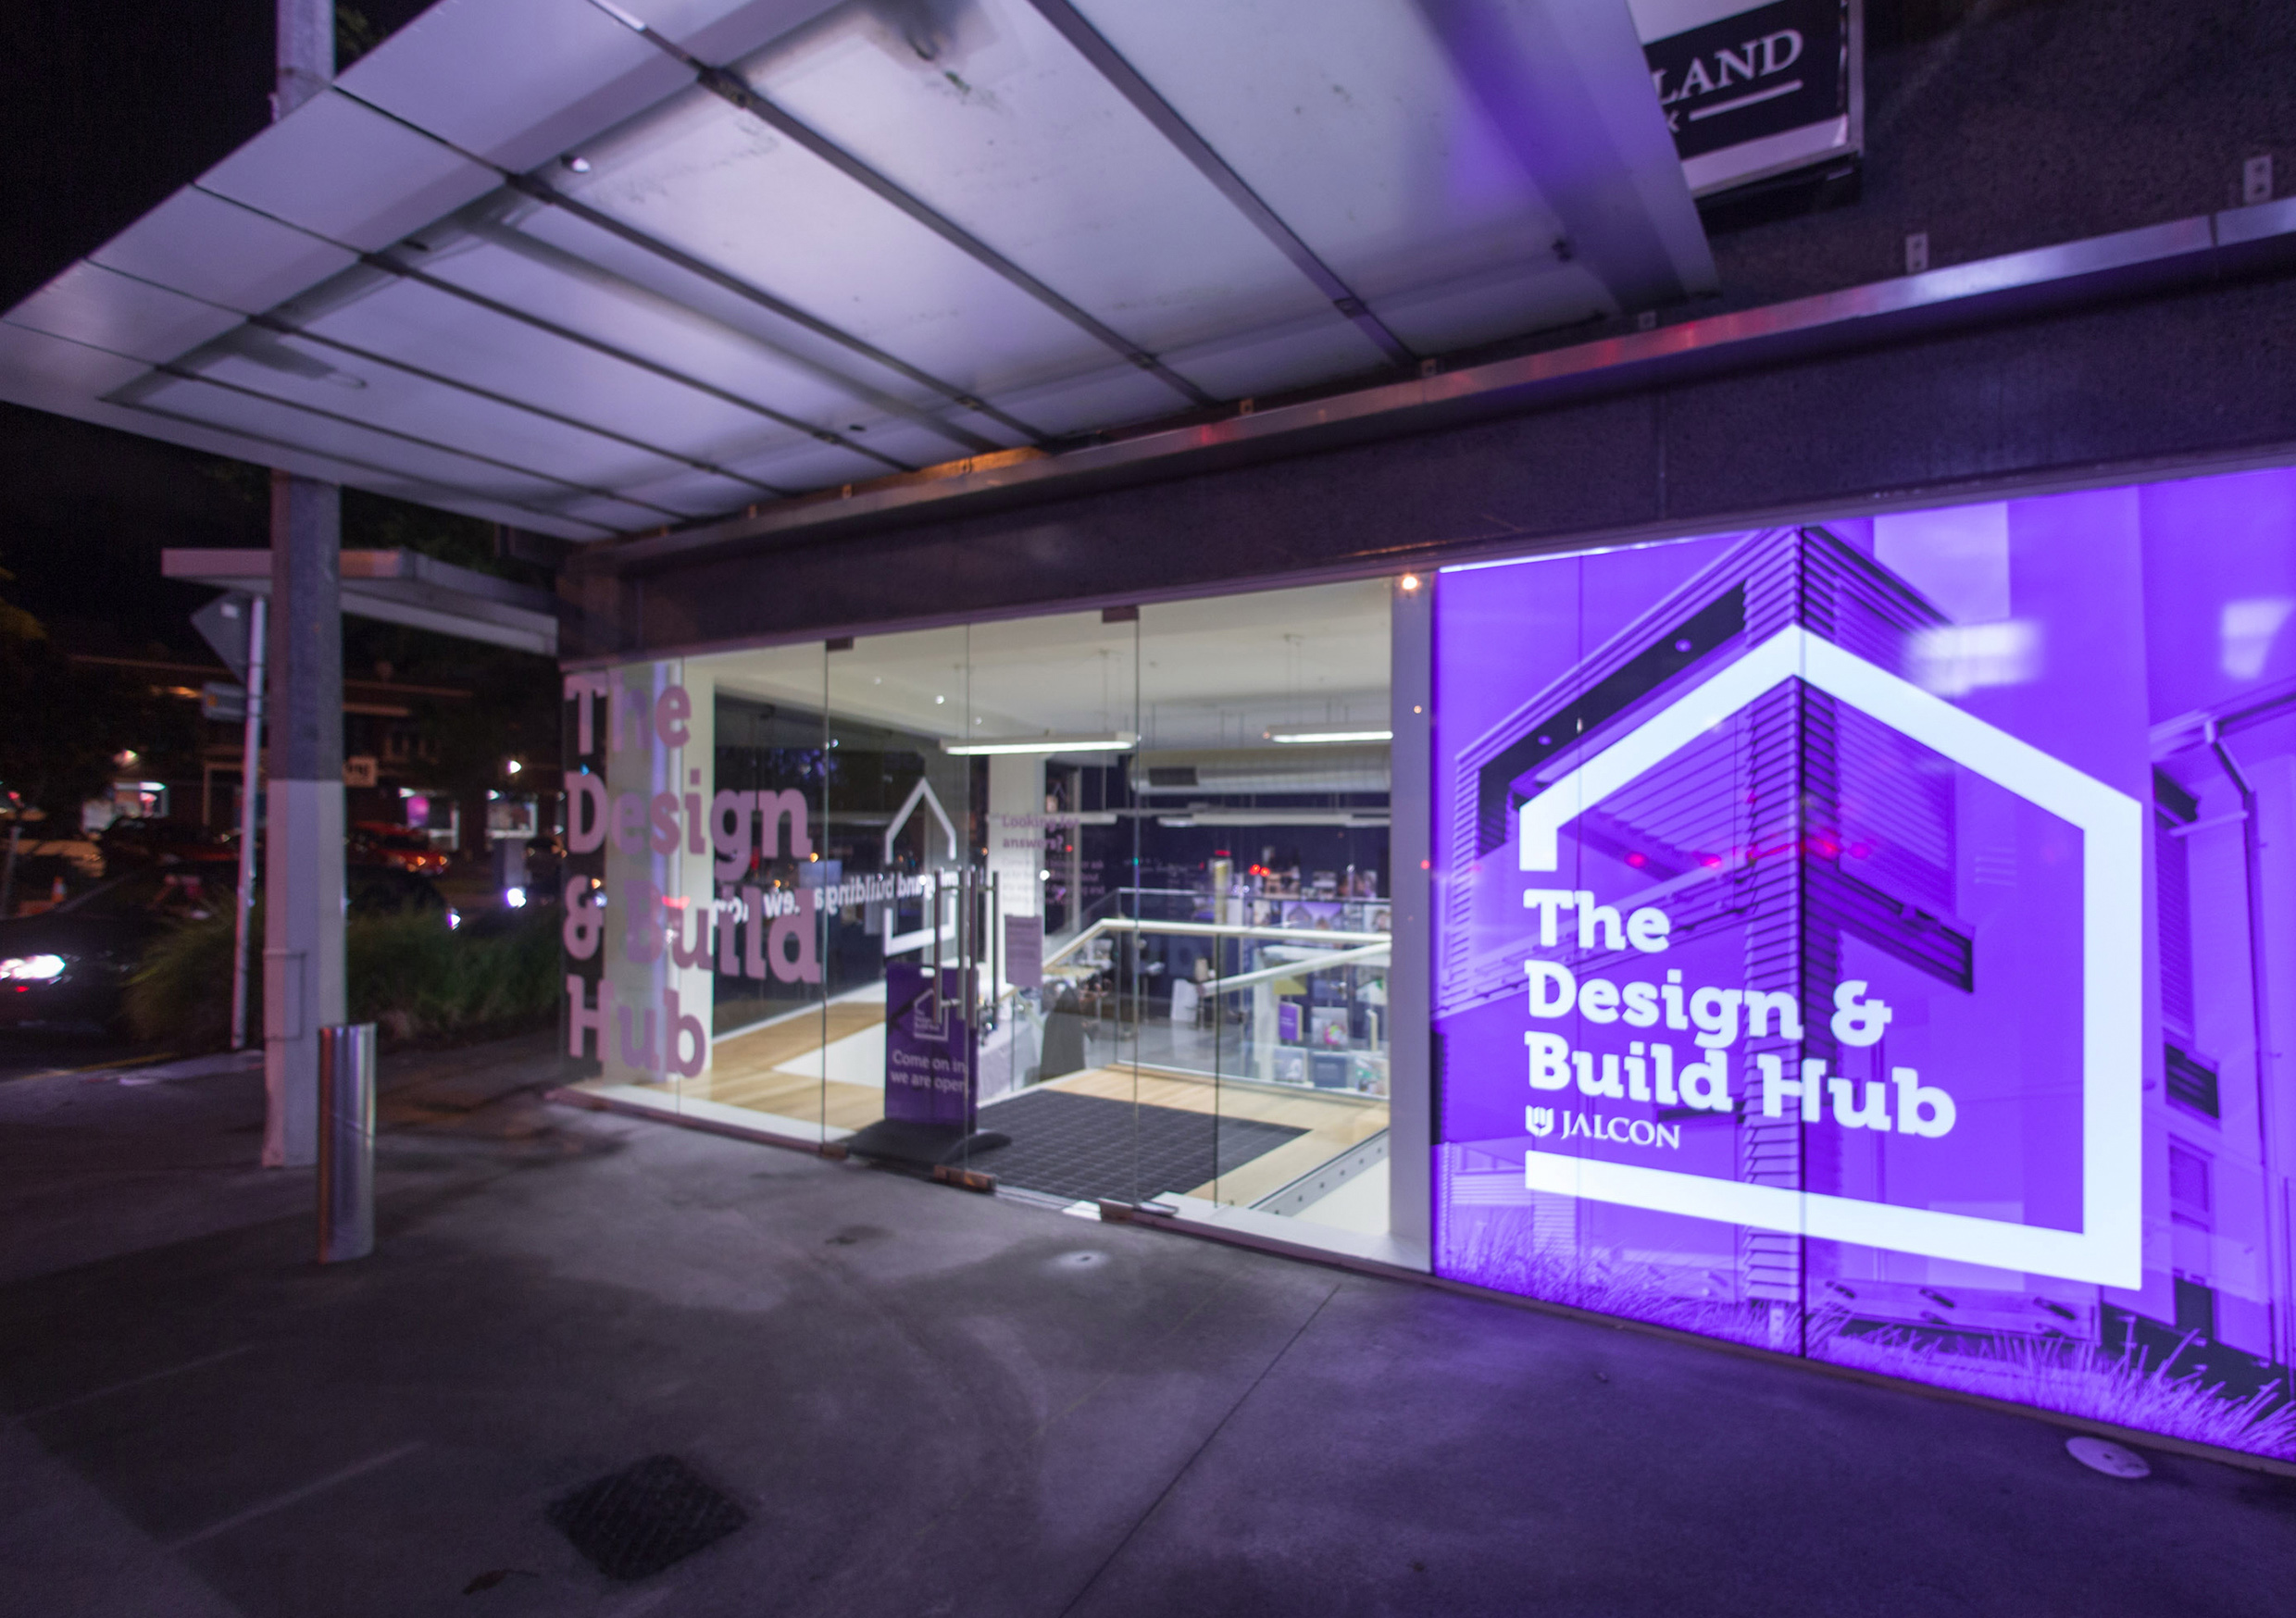 The Design and Build Hub storefront